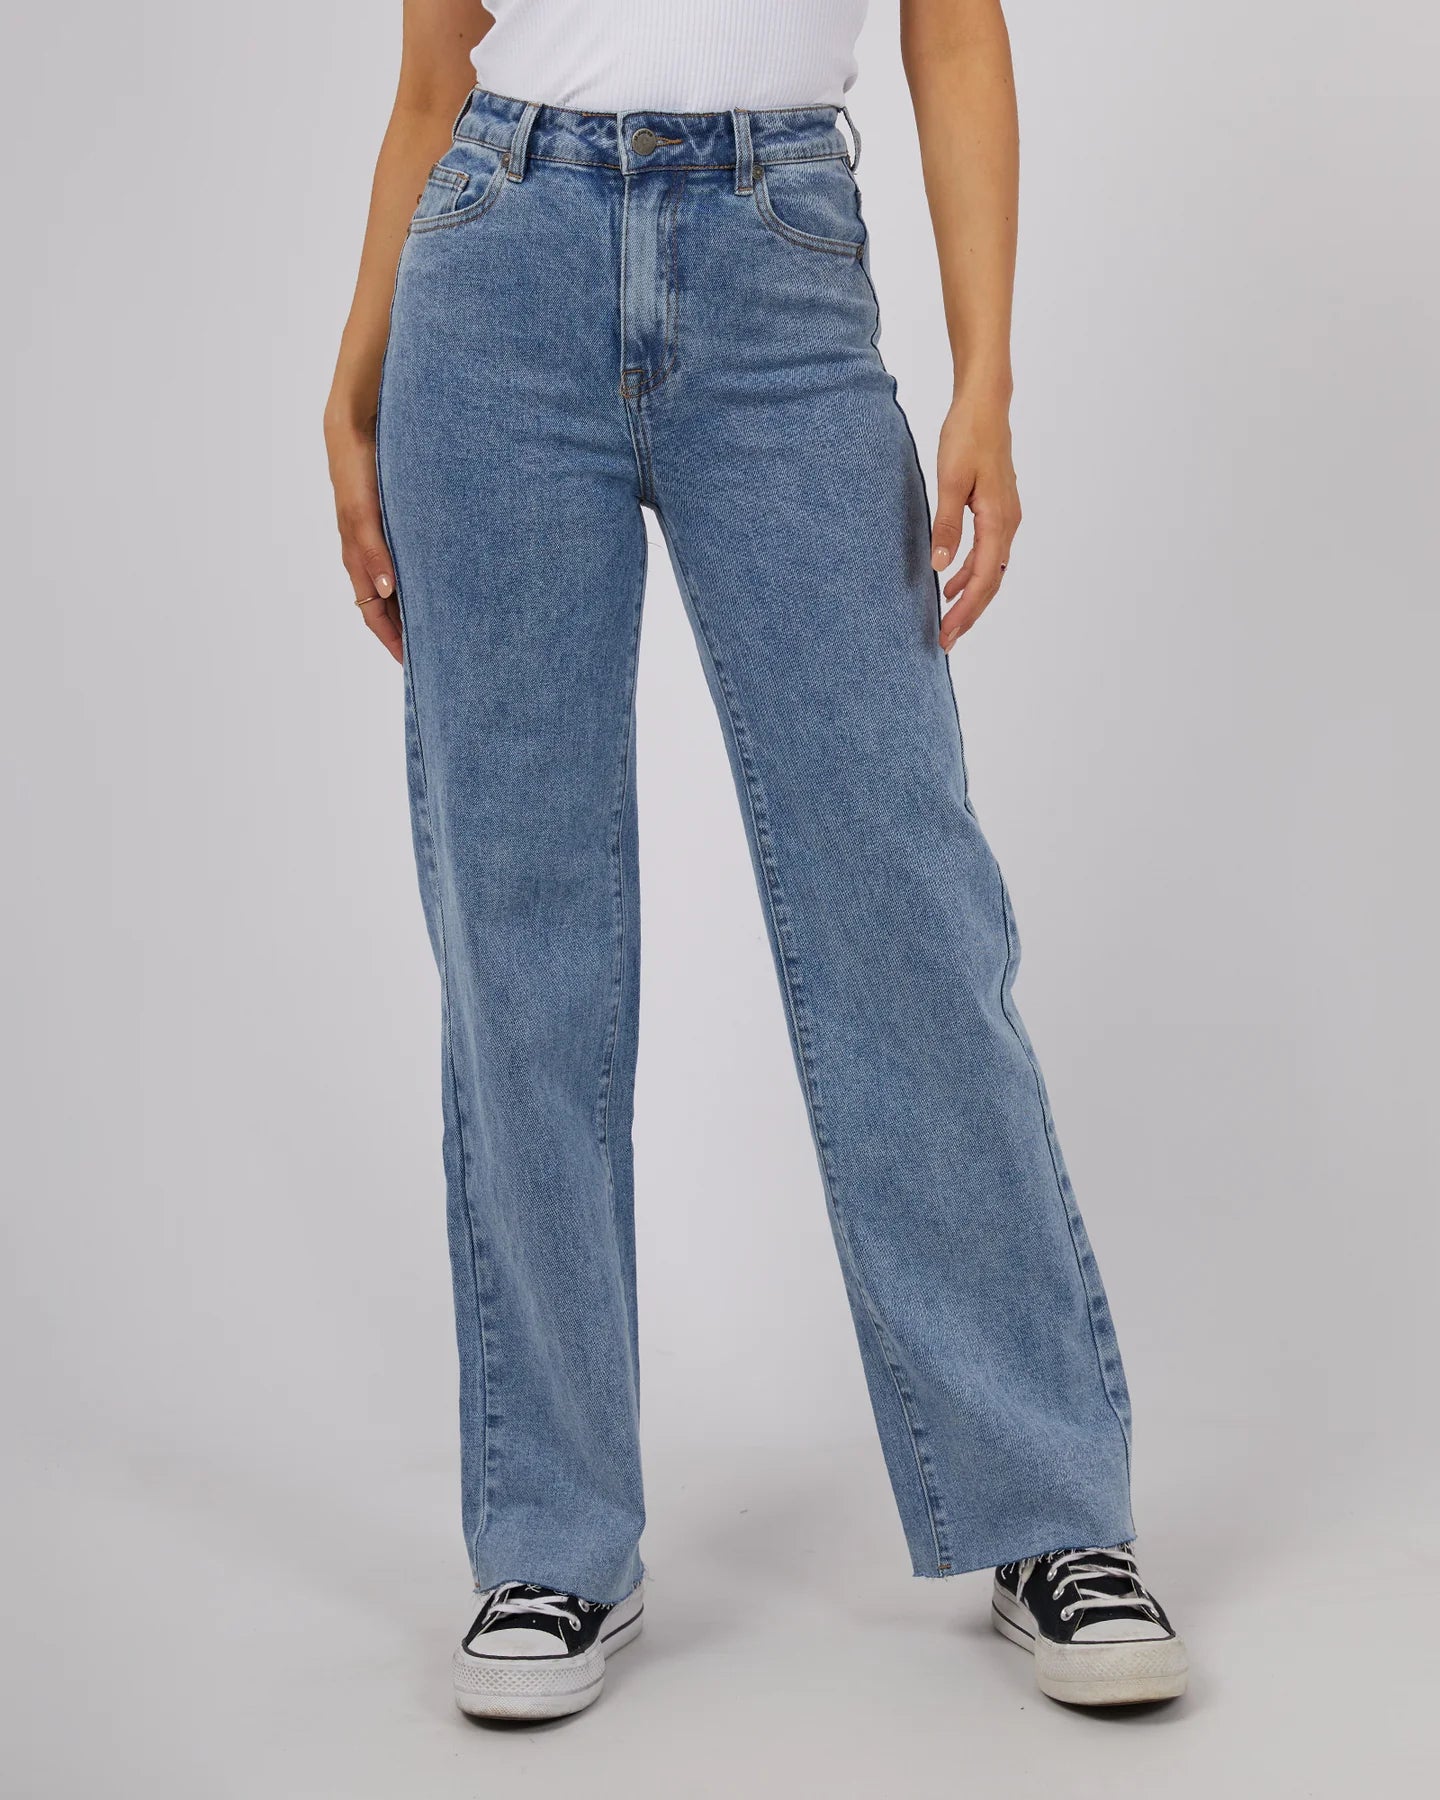 All About Eve - SKYE COMFORT JEANS - DENIM